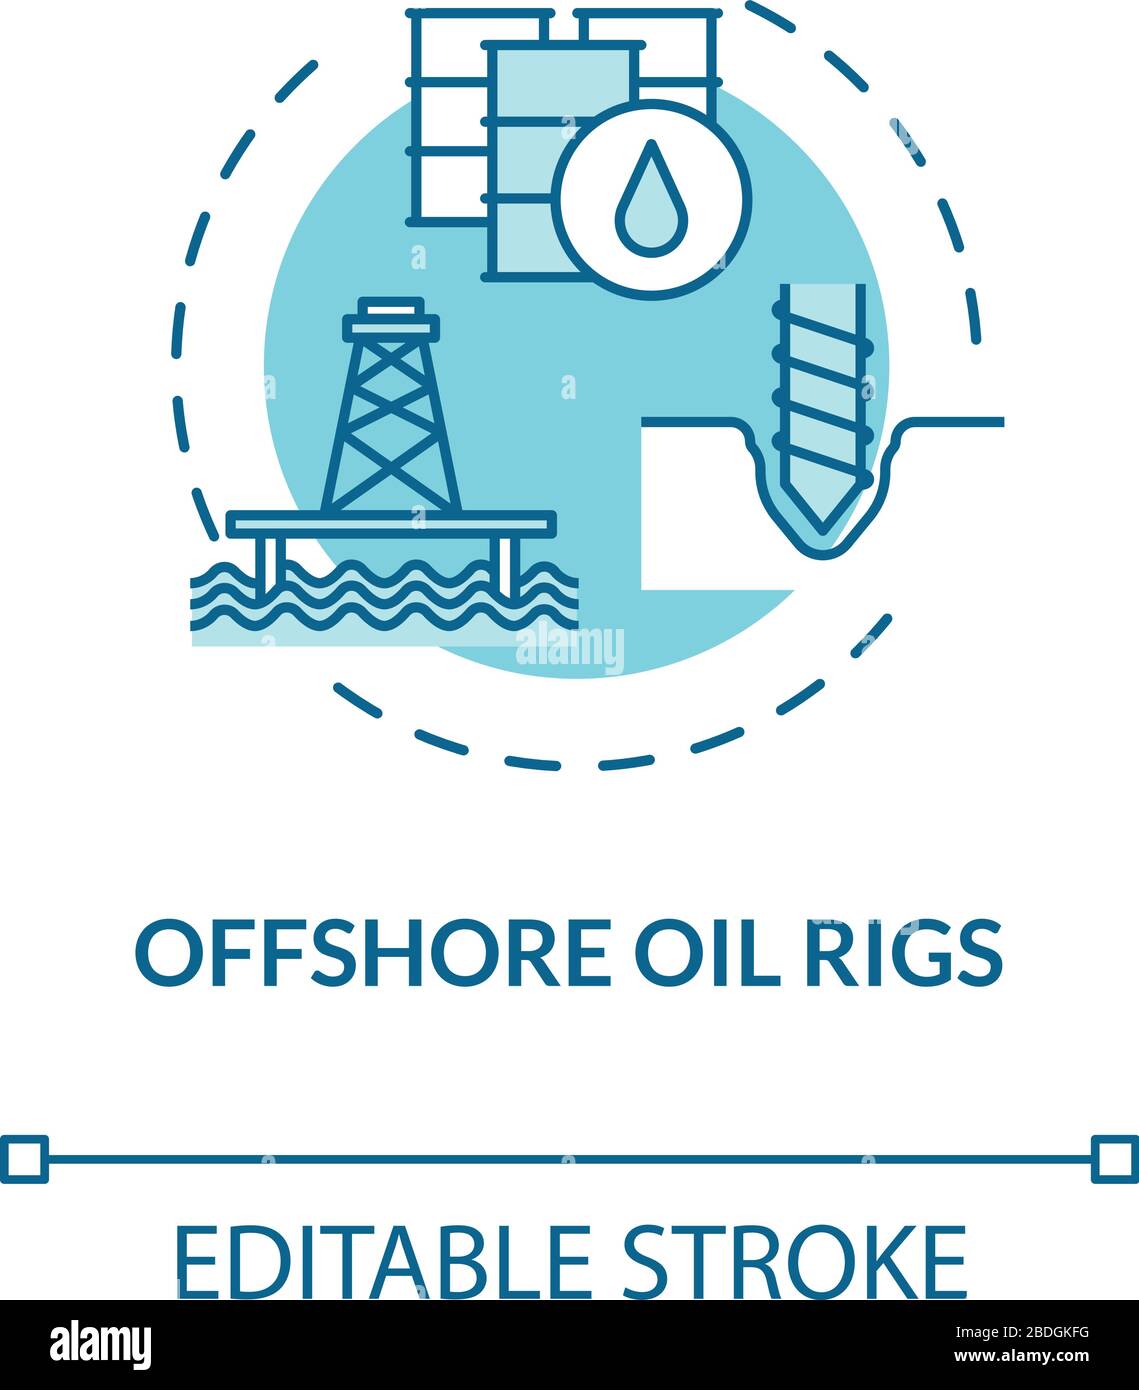 Offshore oil oilfield Stock Vector Images - Alamy